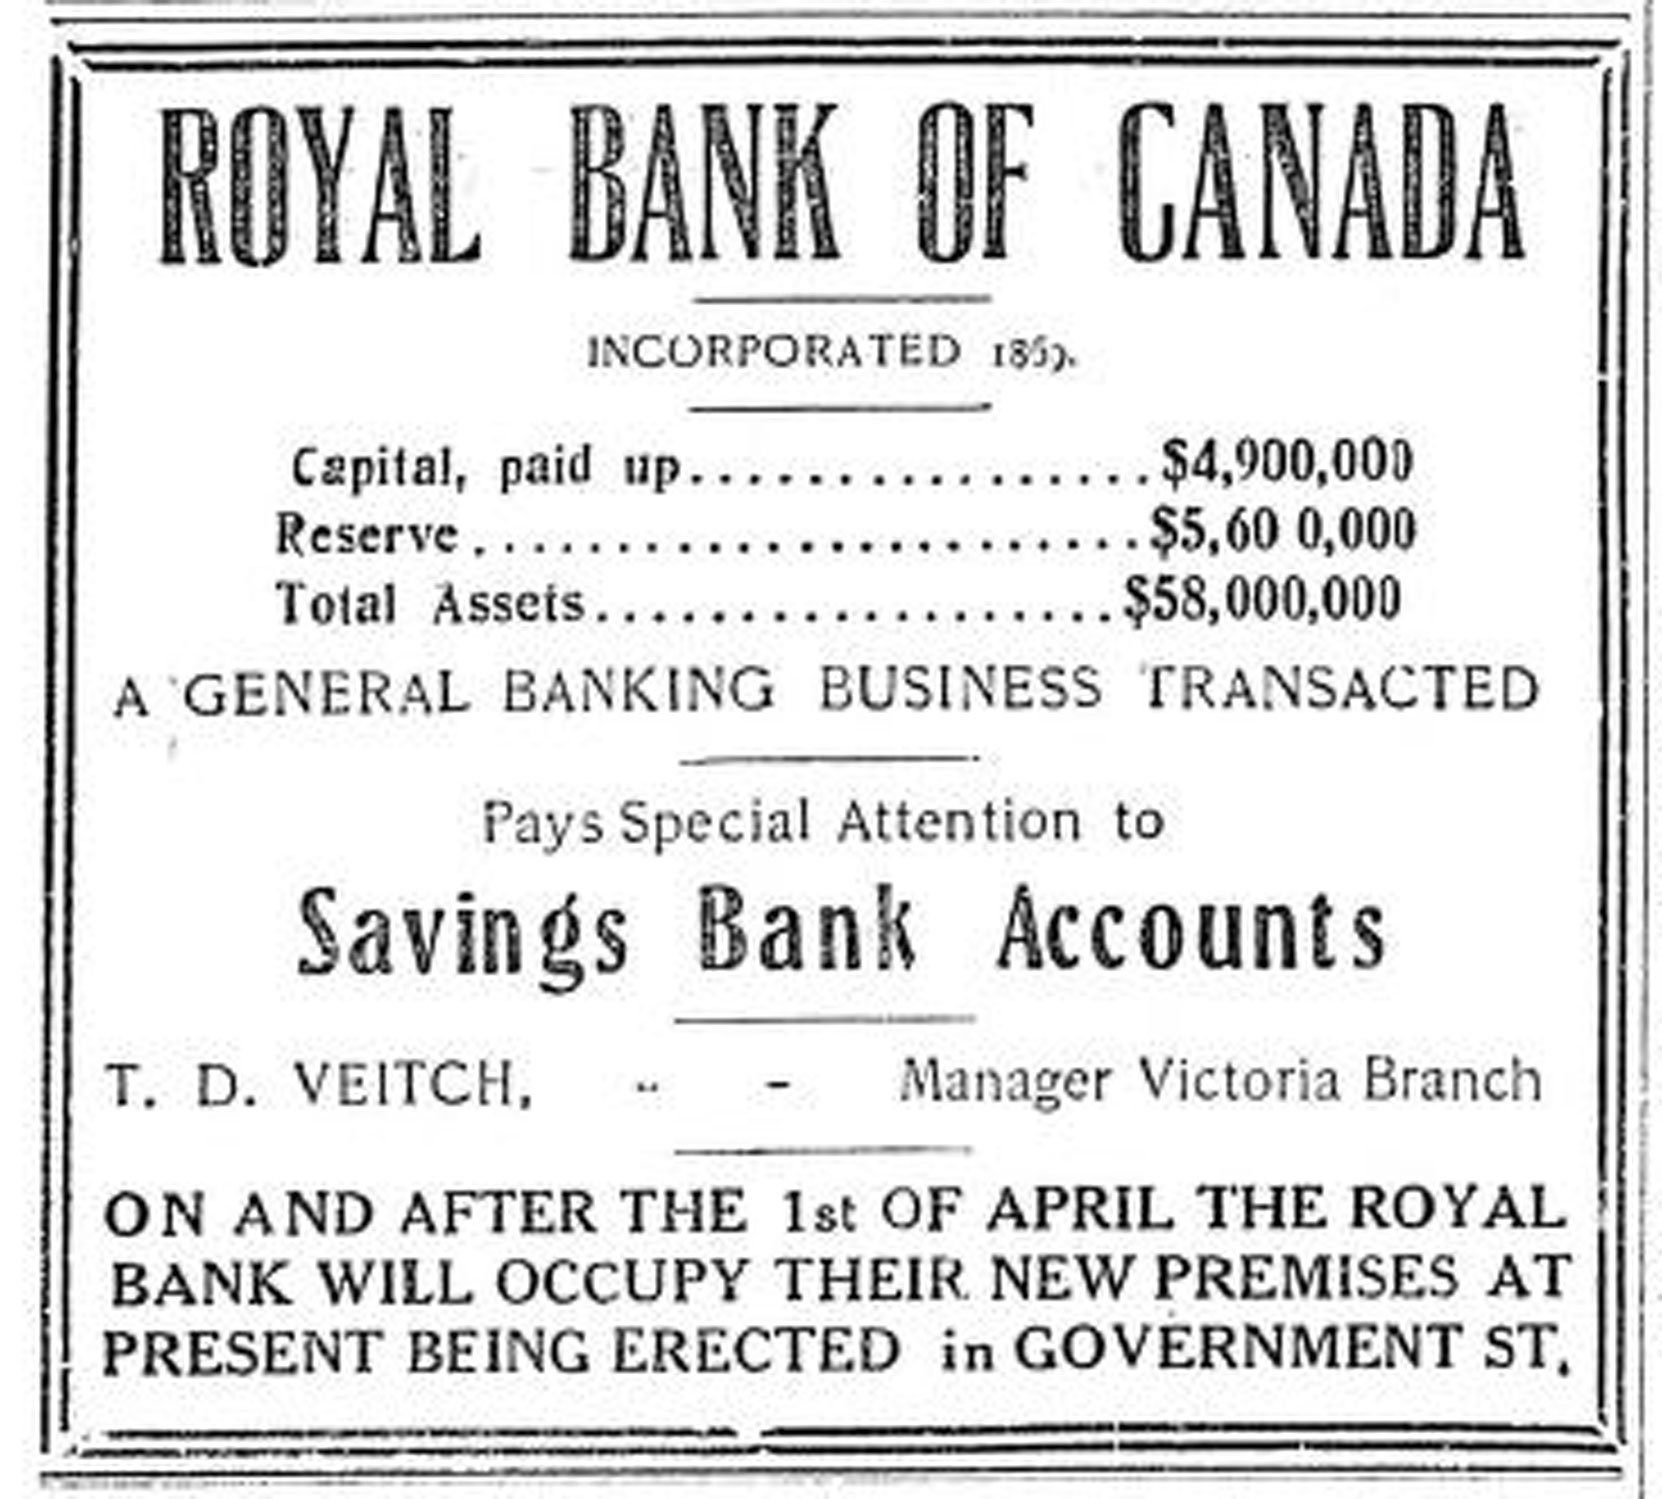 1909 advertisement for Royal Bank of Canada, Victoria Branch. The "New Premises At Present Being Erected In Government Street" is 1108 Government Street. (Victoria Online Sightseeing collection)